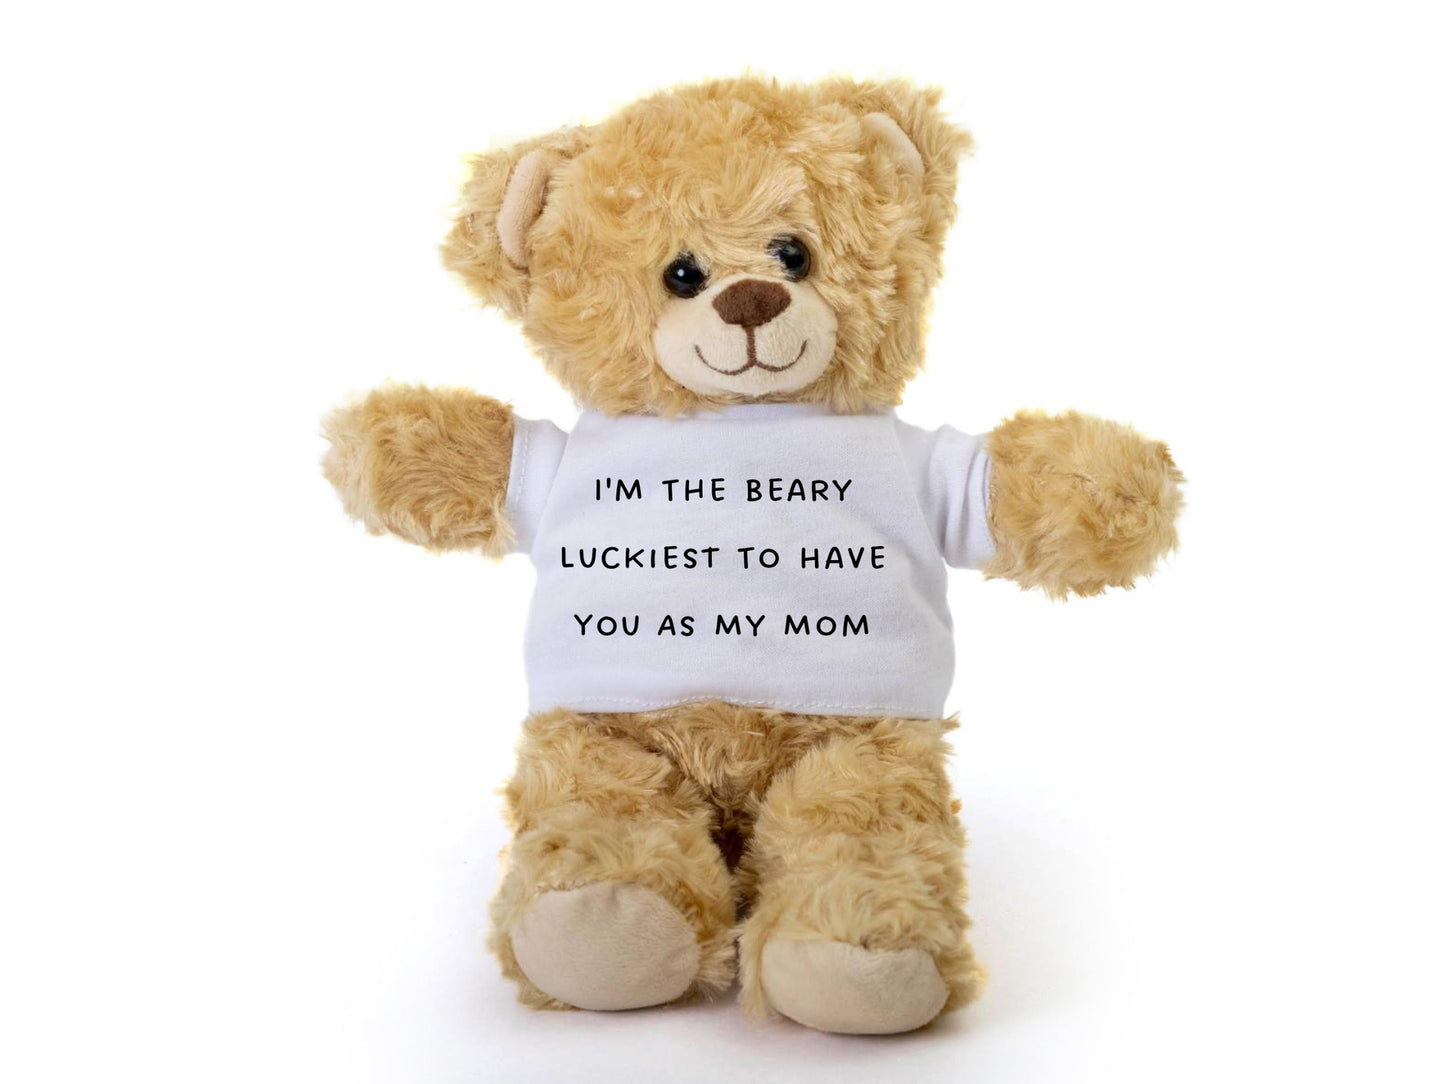 Mom Teddy Bear Gift, I'm The Beary Luckiest To Have You As My Mom, Custom Teddy Bear, Gift for Mom, Teddy Bear For Mom, Mother's Day Gift